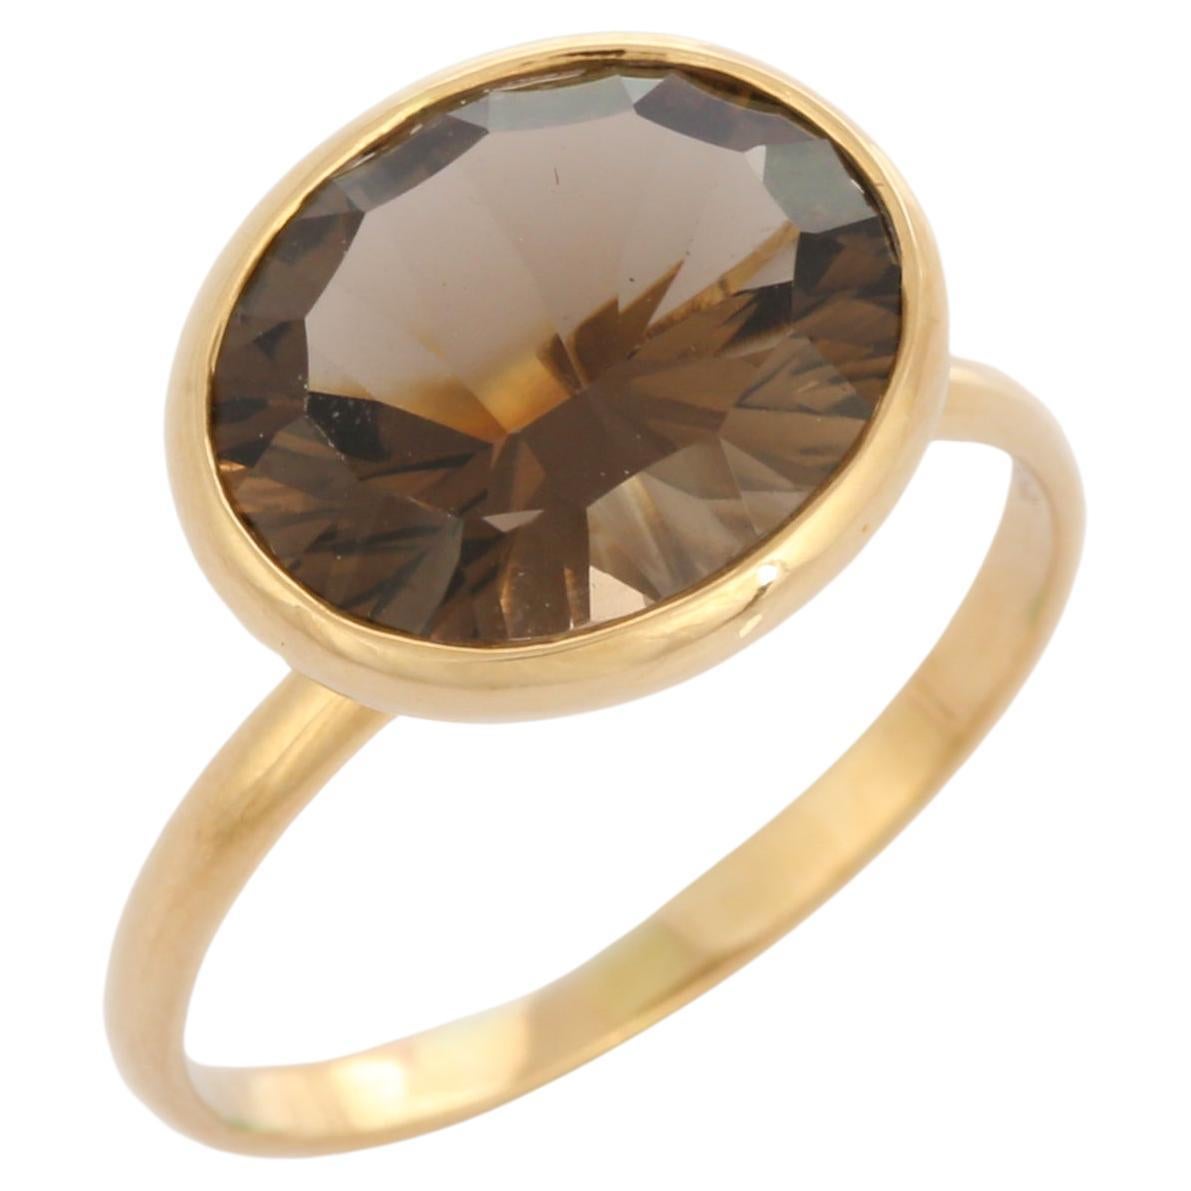 For Sale:  Horizontal Oval Cut Smokey Topaz 18K Yellow Gold Solitaire Ring